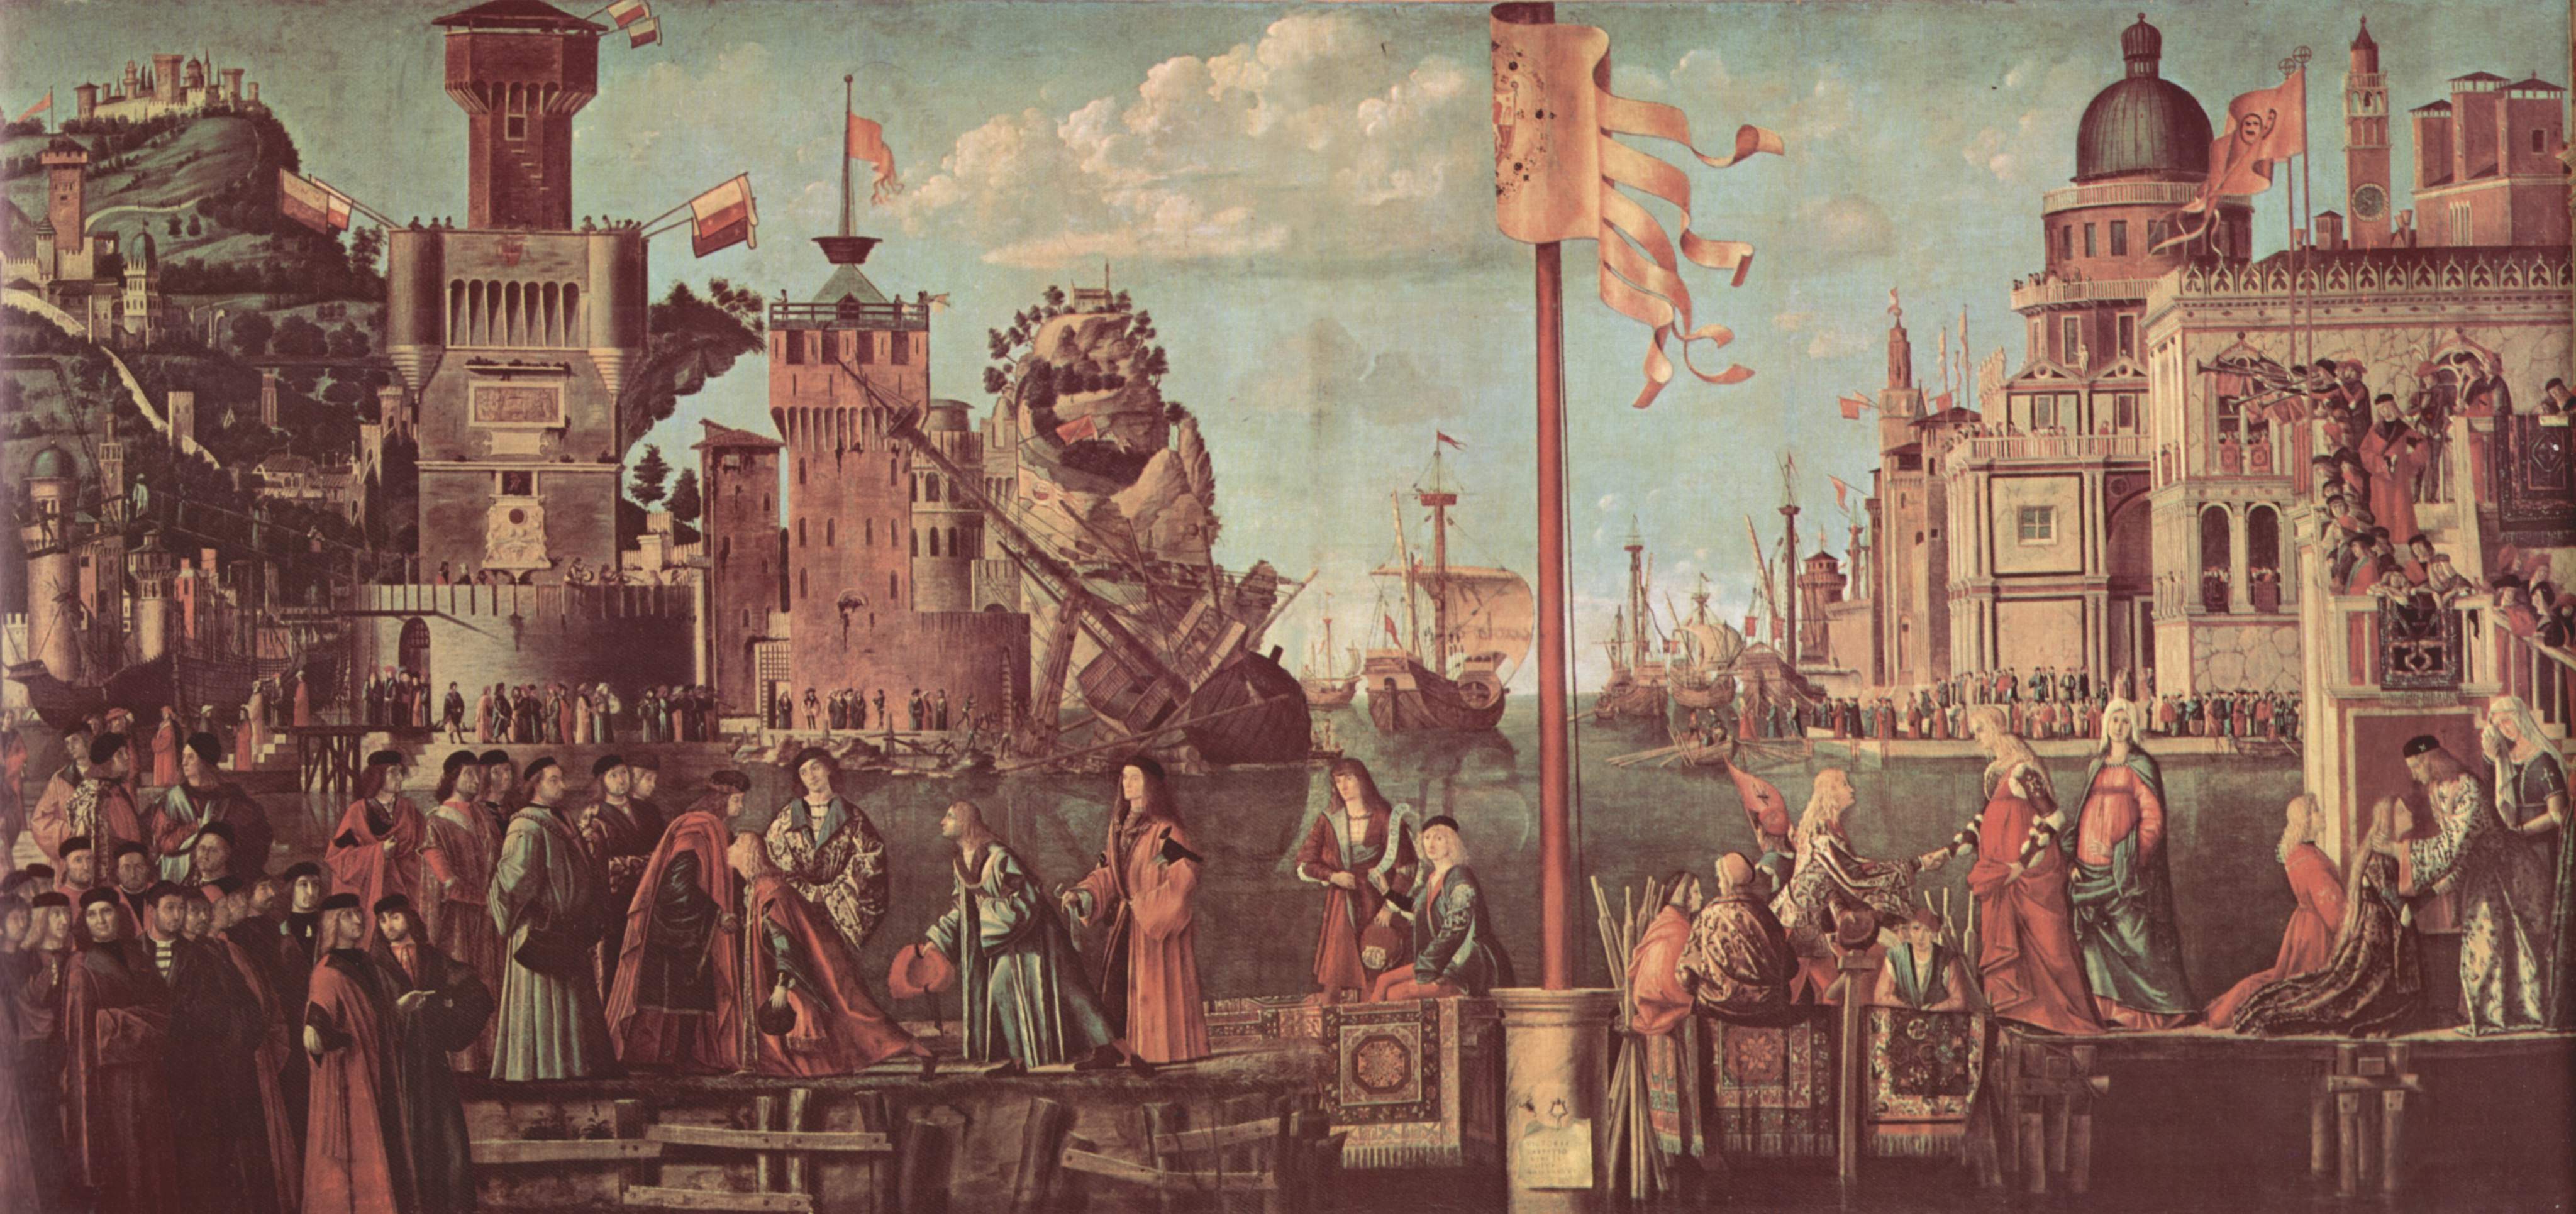 Meeting of Etherius by Carpaccio